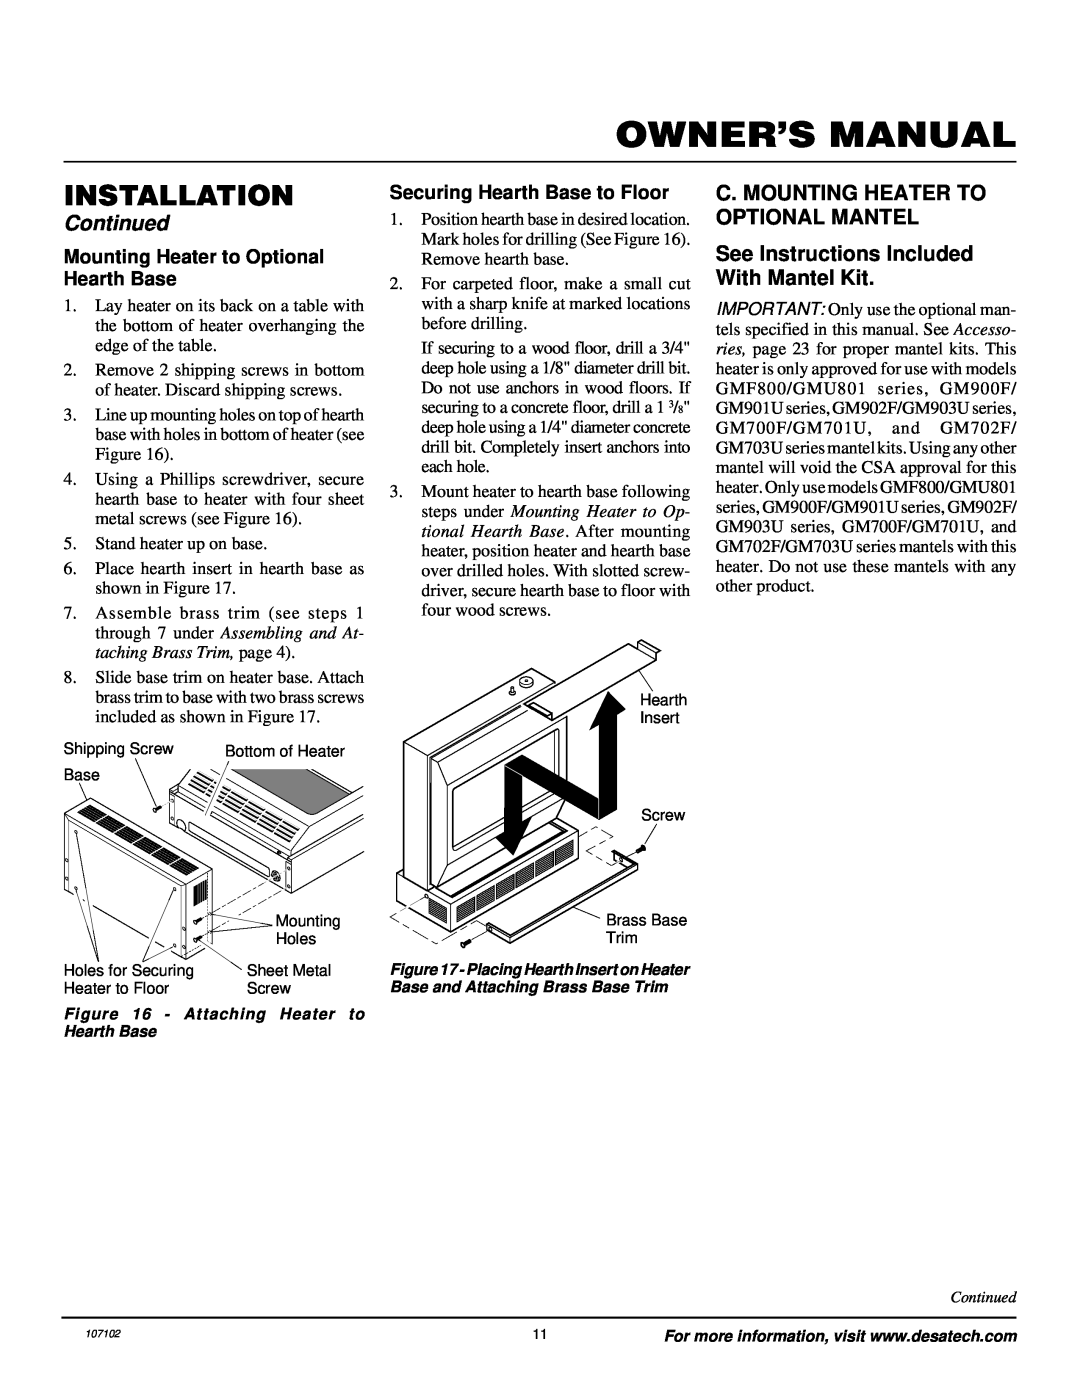 Vanguard Heating VMH3000TPSA C. Mounting Heater To Optional Mantel, See Instructions Included With Mantel Kit, Continued 